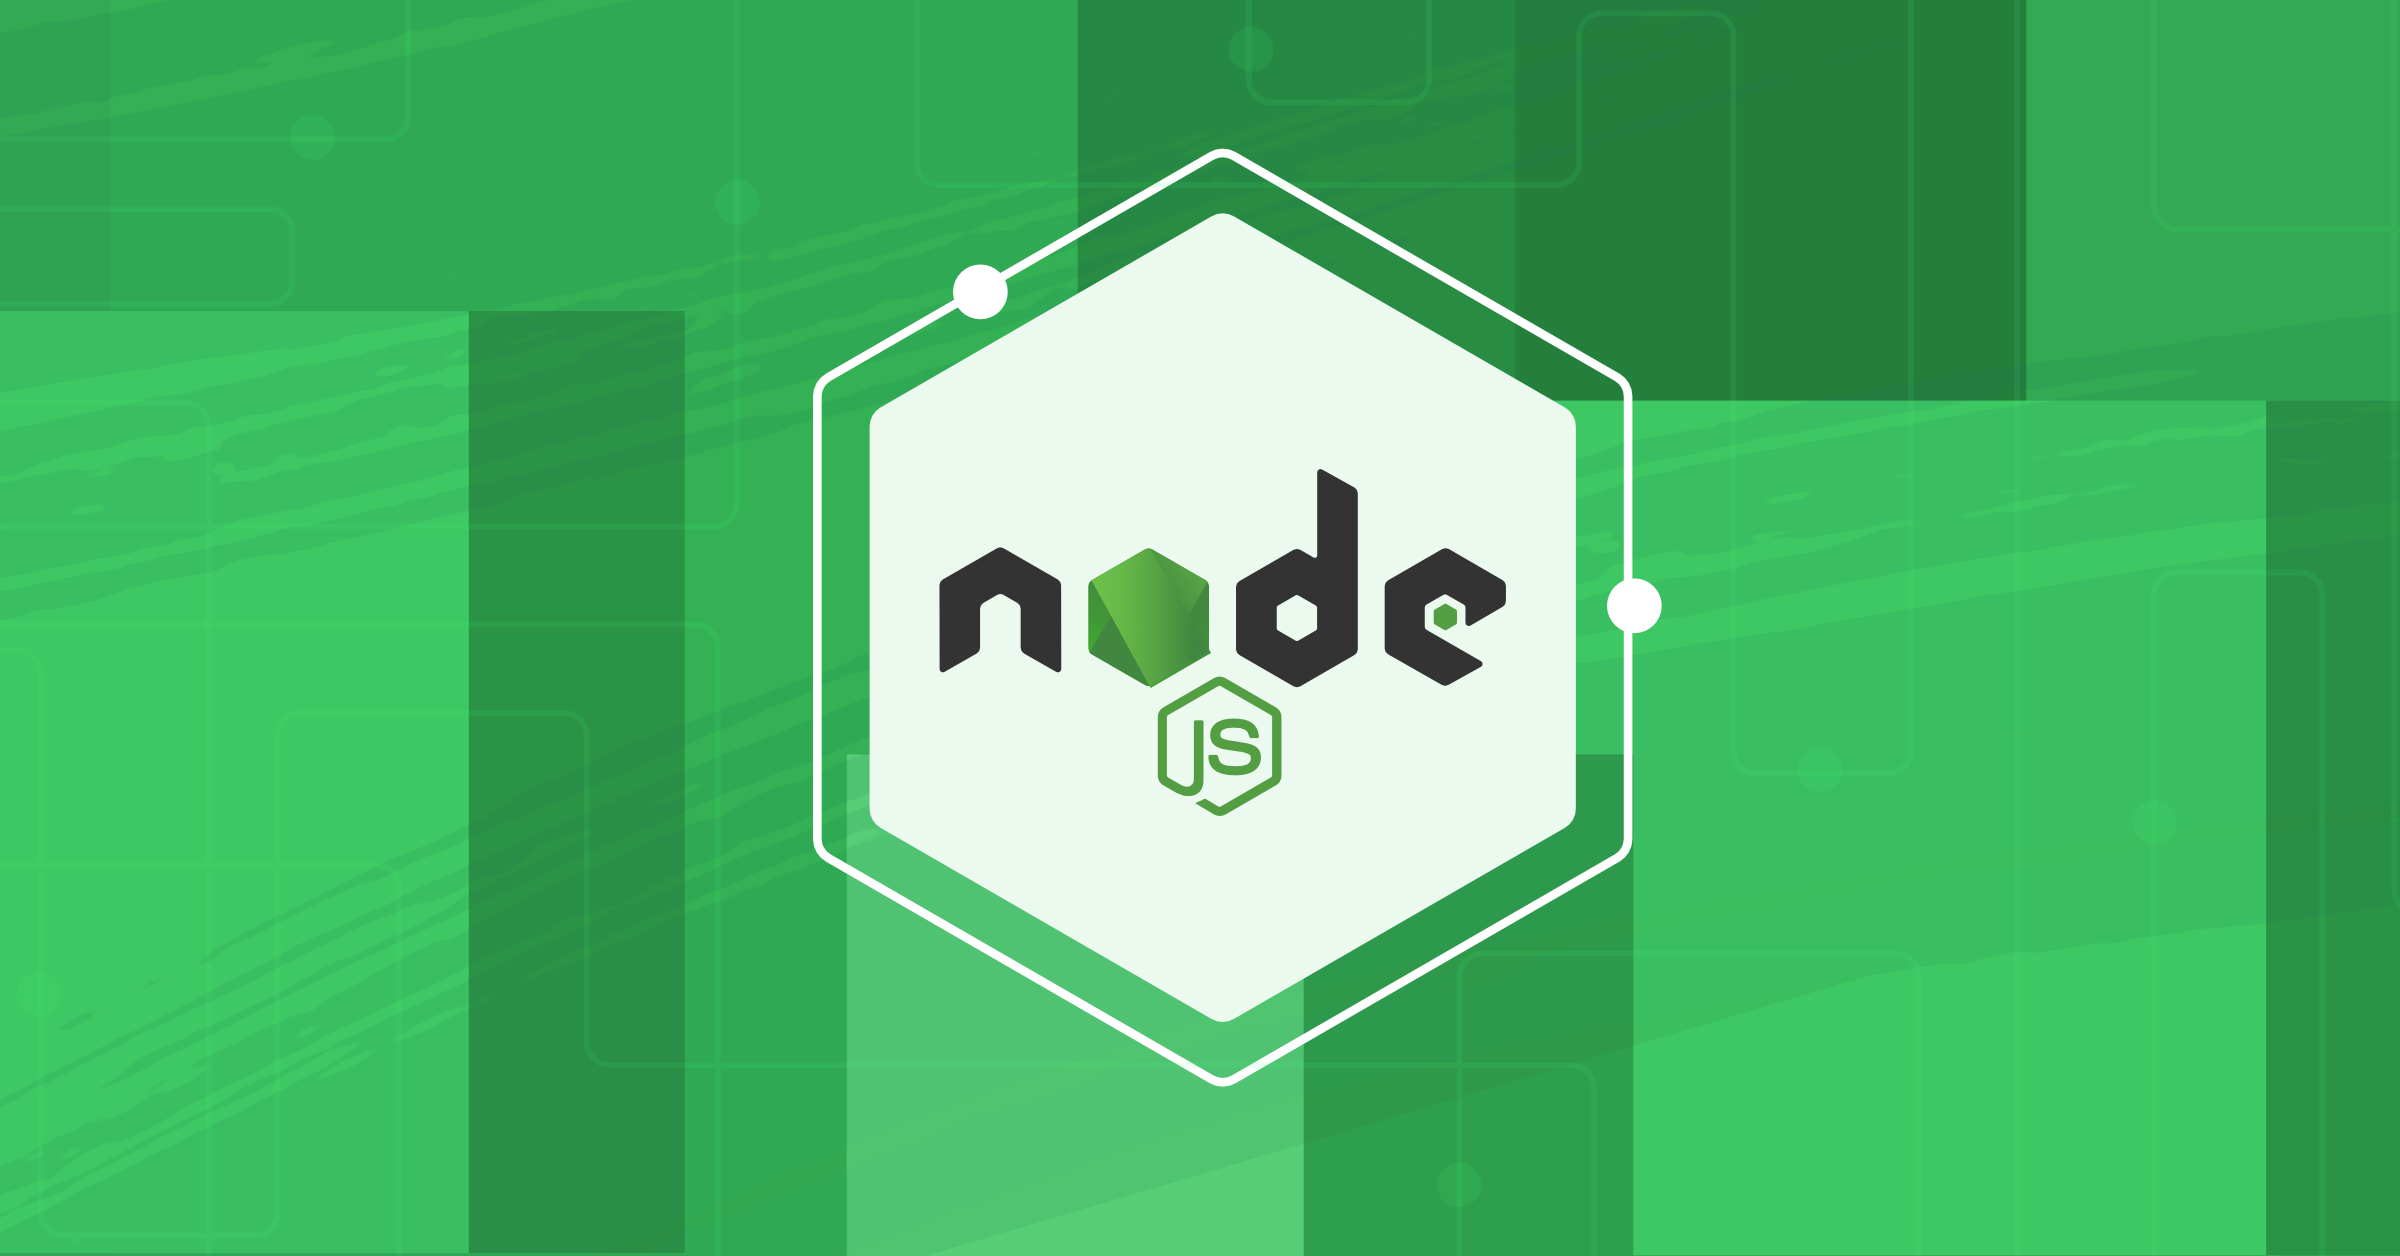 How to automate tests and deployments of Node.js apps with Buddy